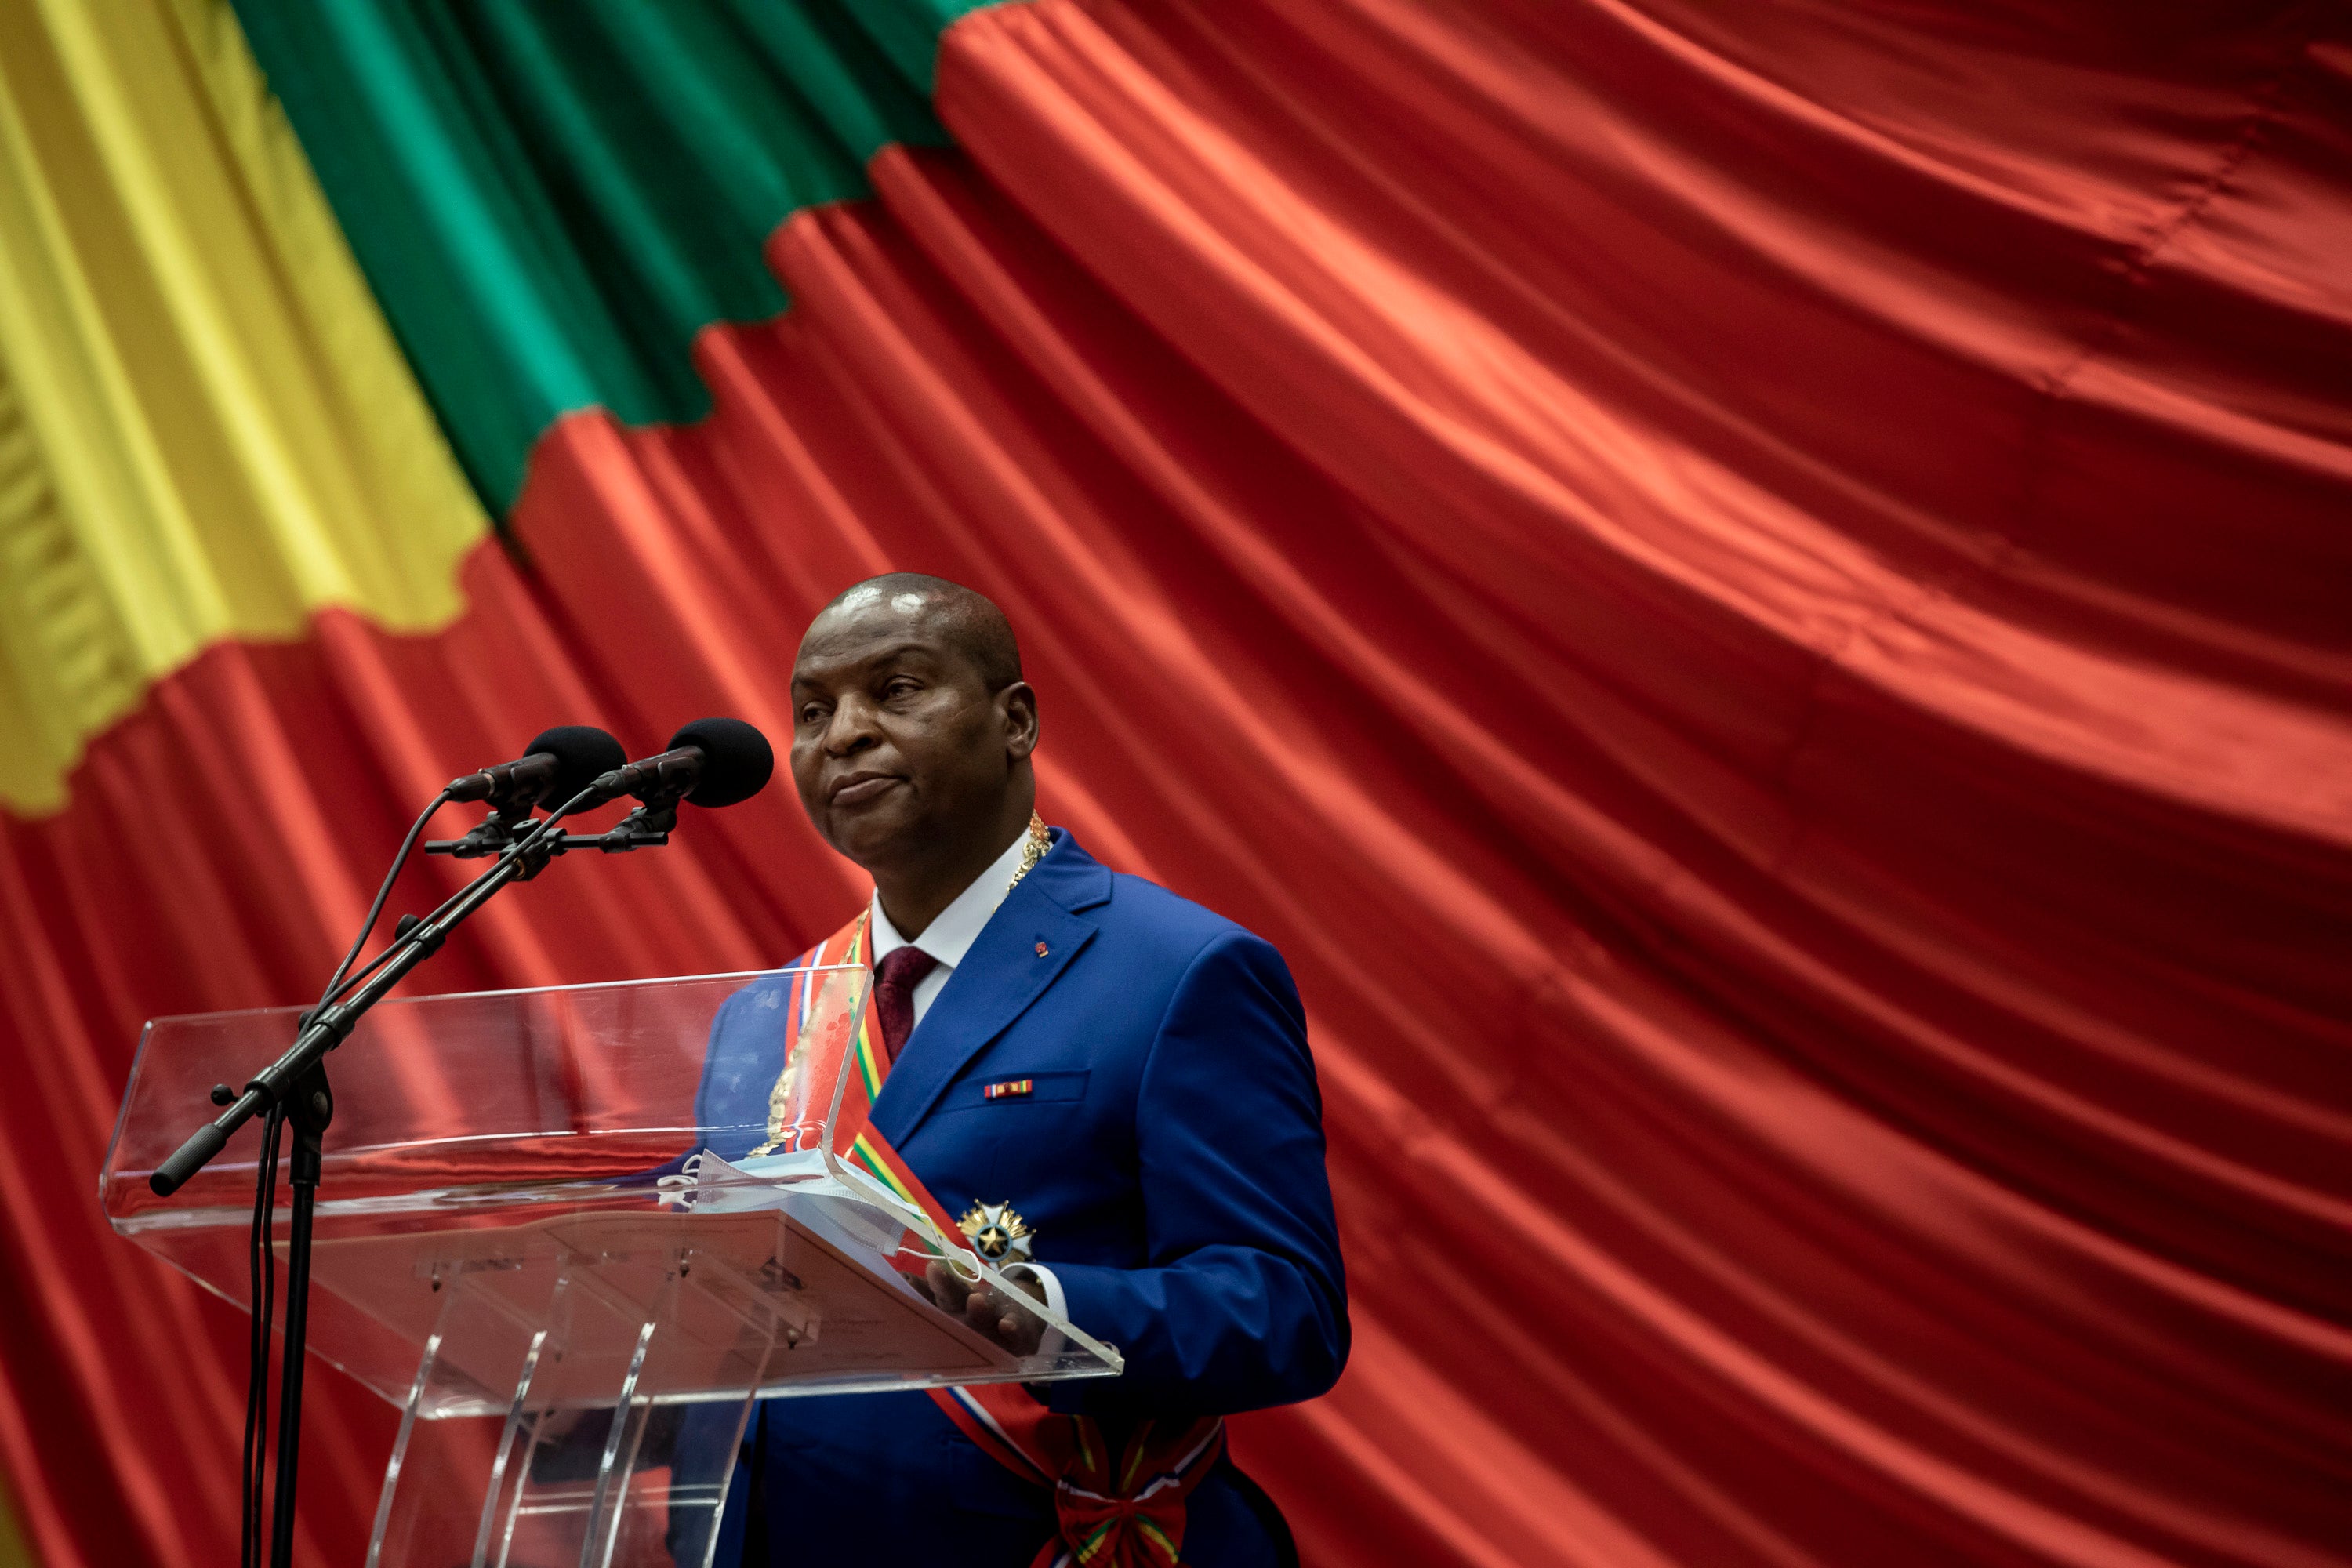 Central African Republic President Faustin-Archange Touadéra speaks at his inauguration in Bangui, March 30, 2021 